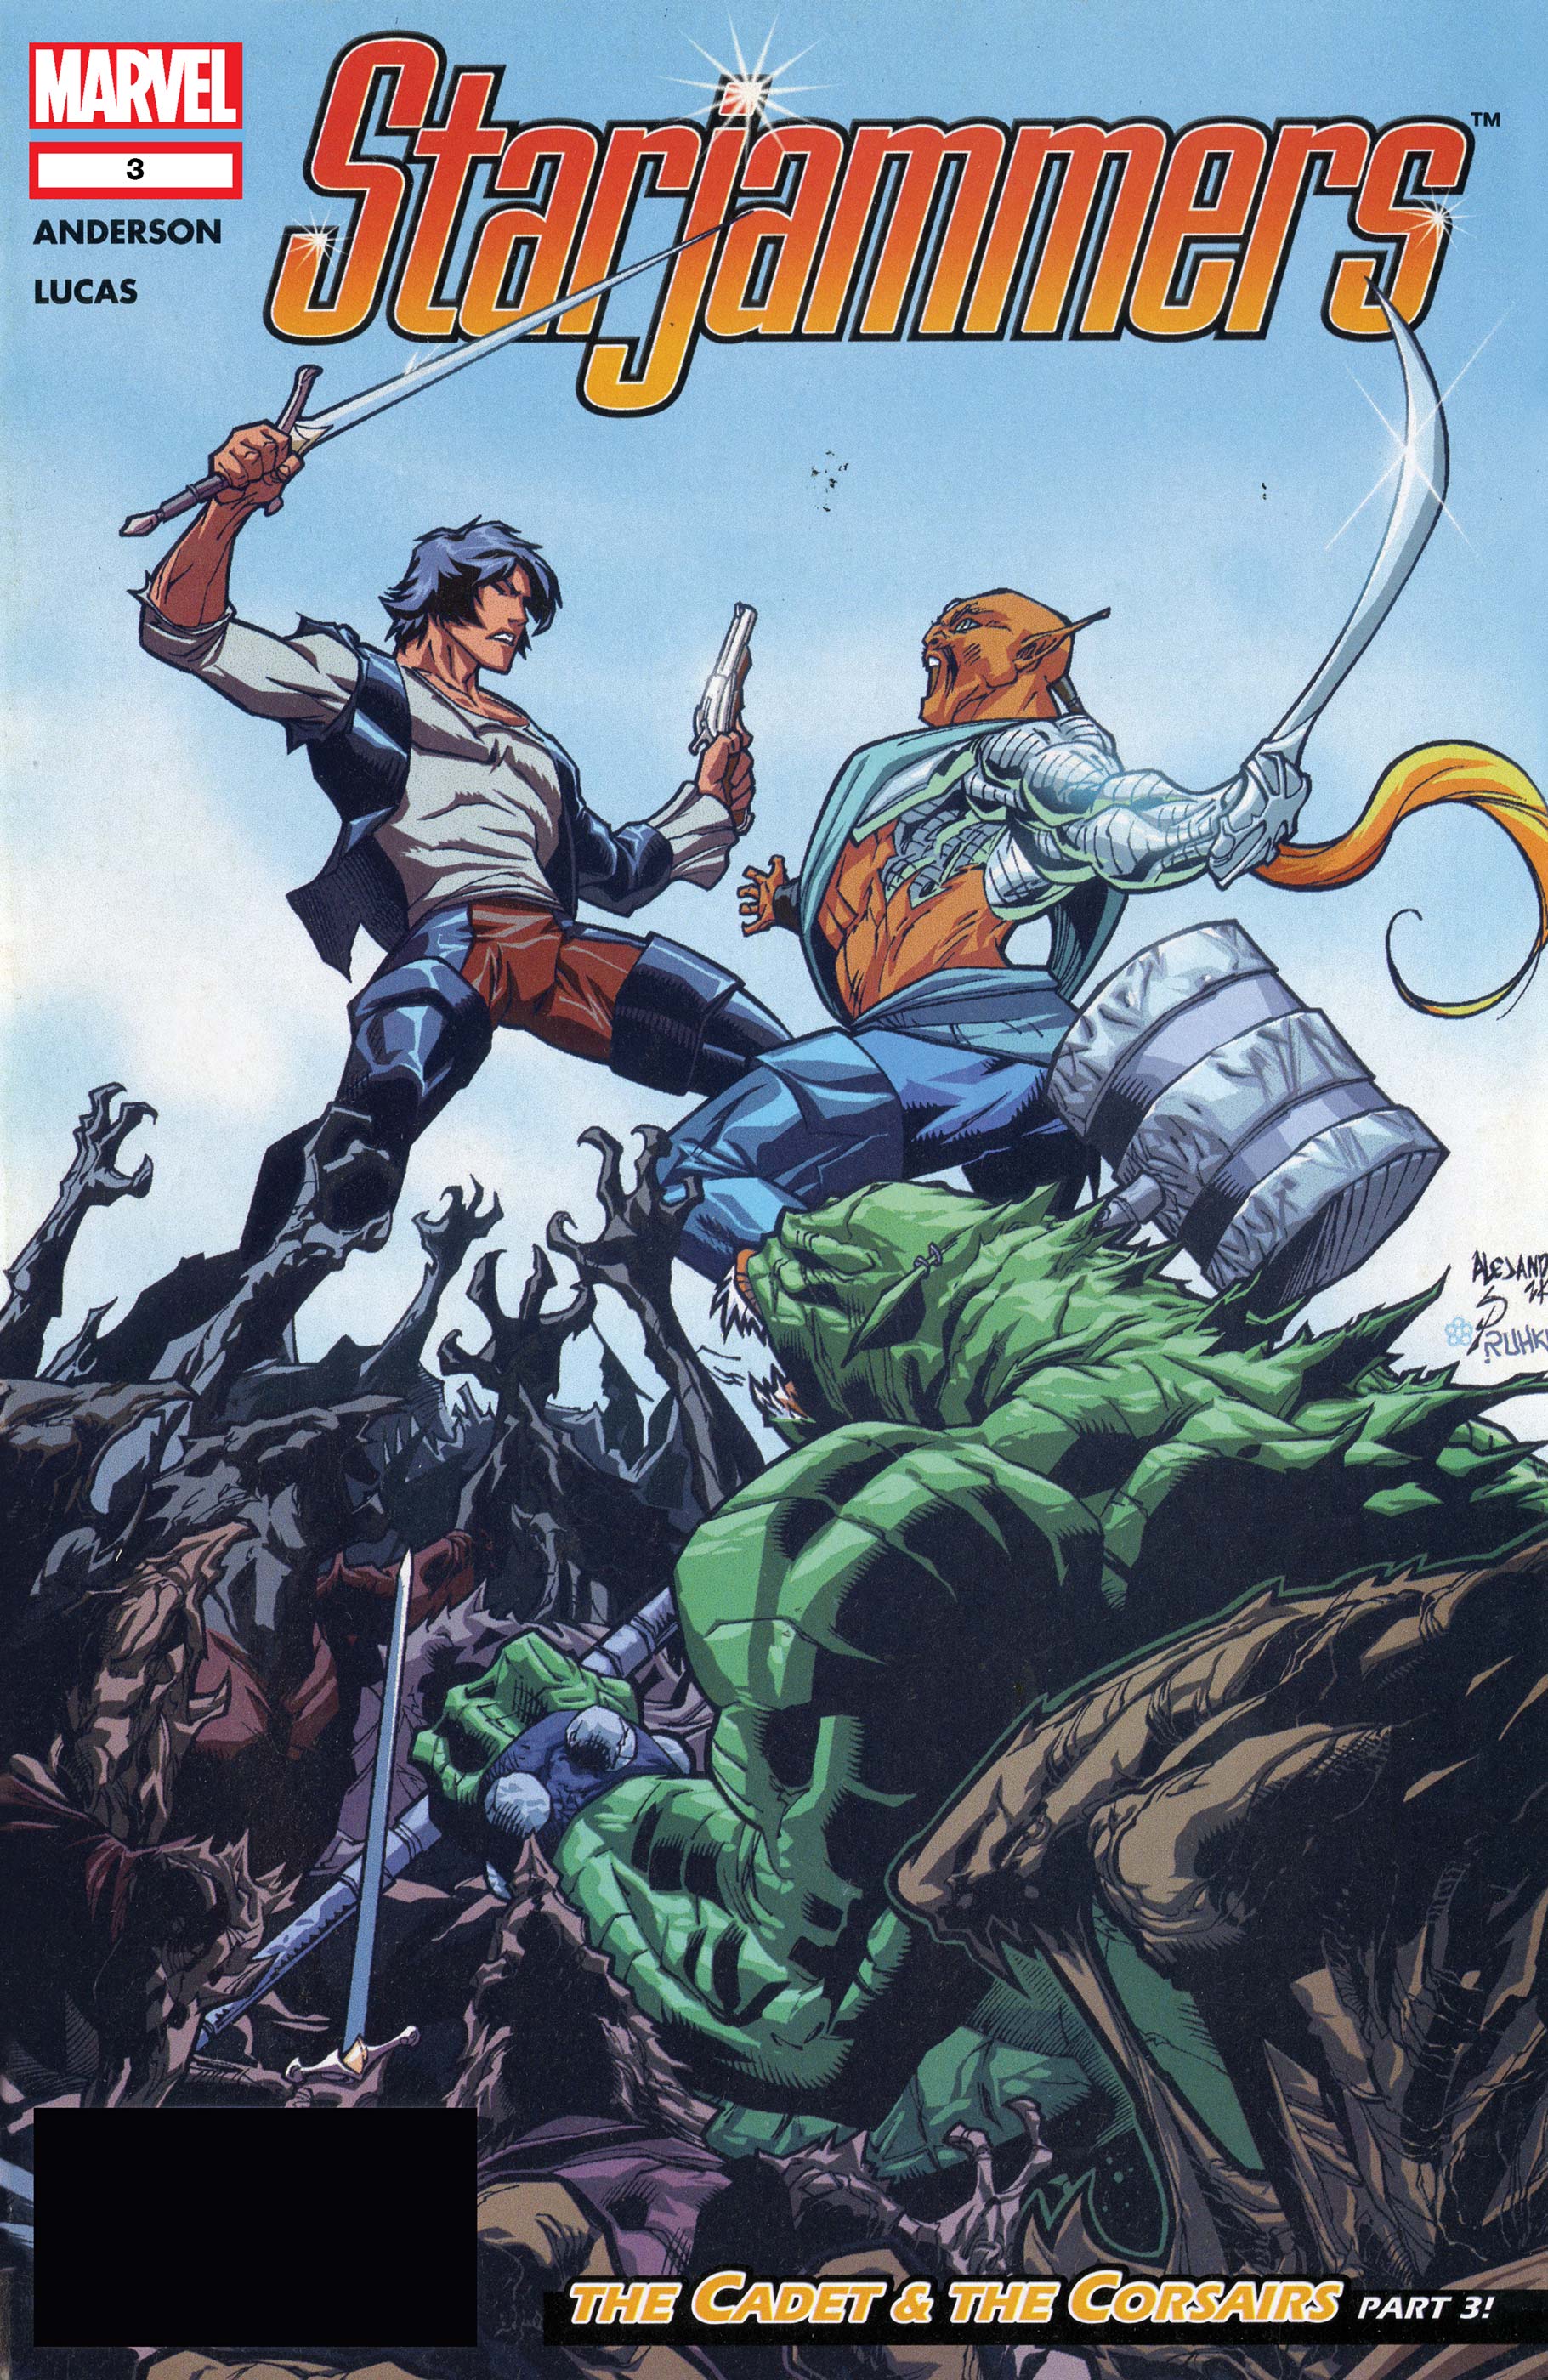 Starjammers (2004) #3